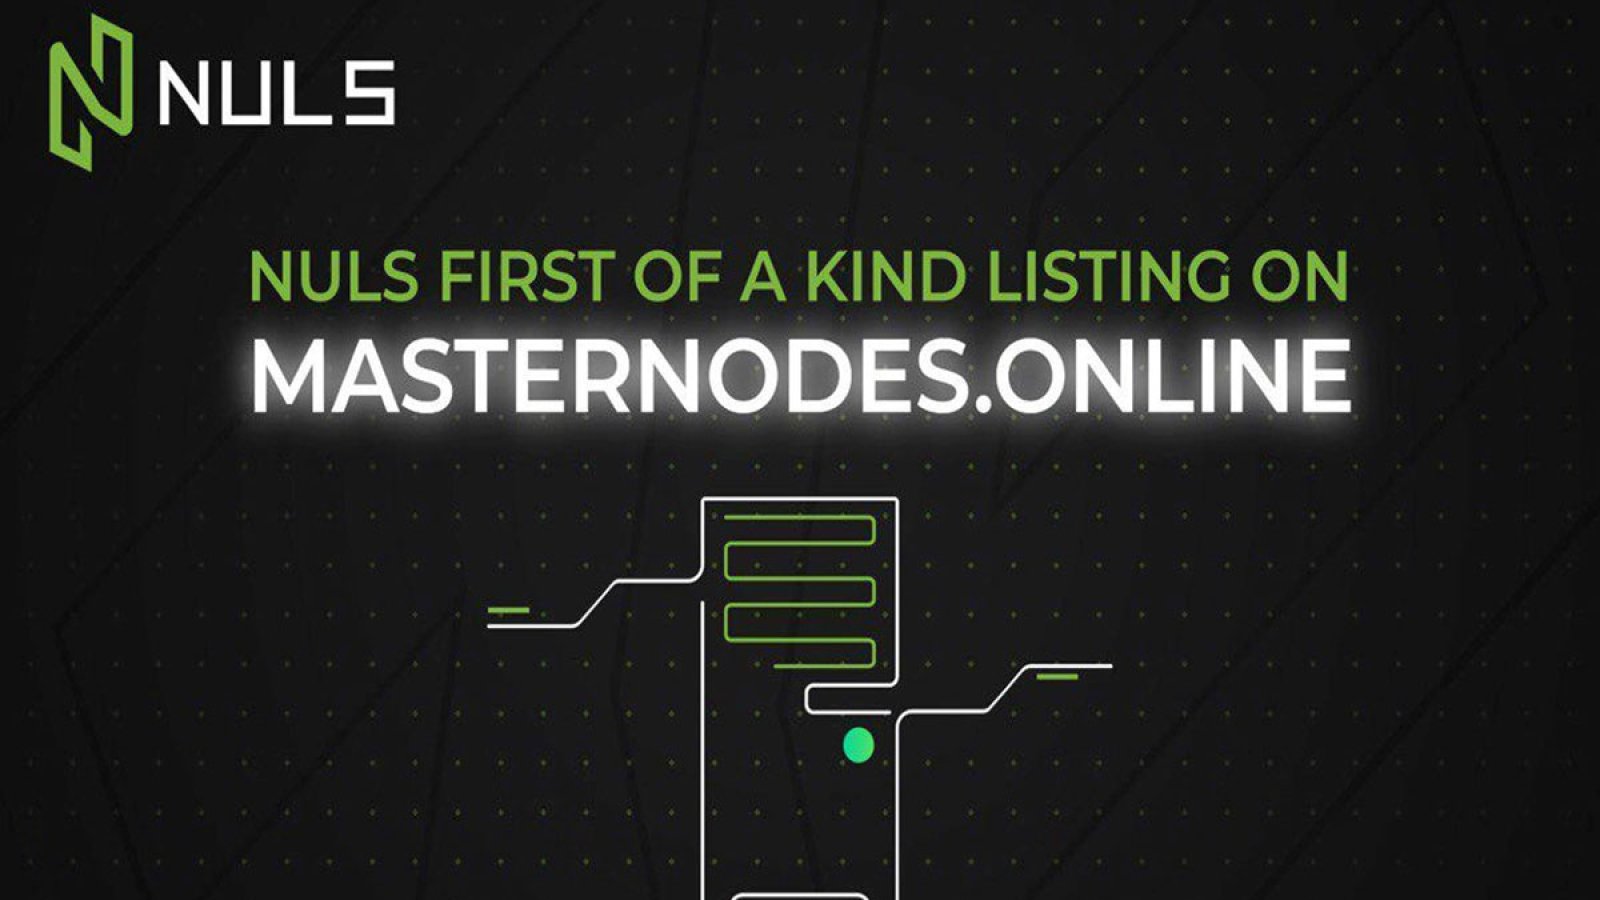 NULS FIRST OF A KIND LISTING ON MASTERNODES.ONLINE